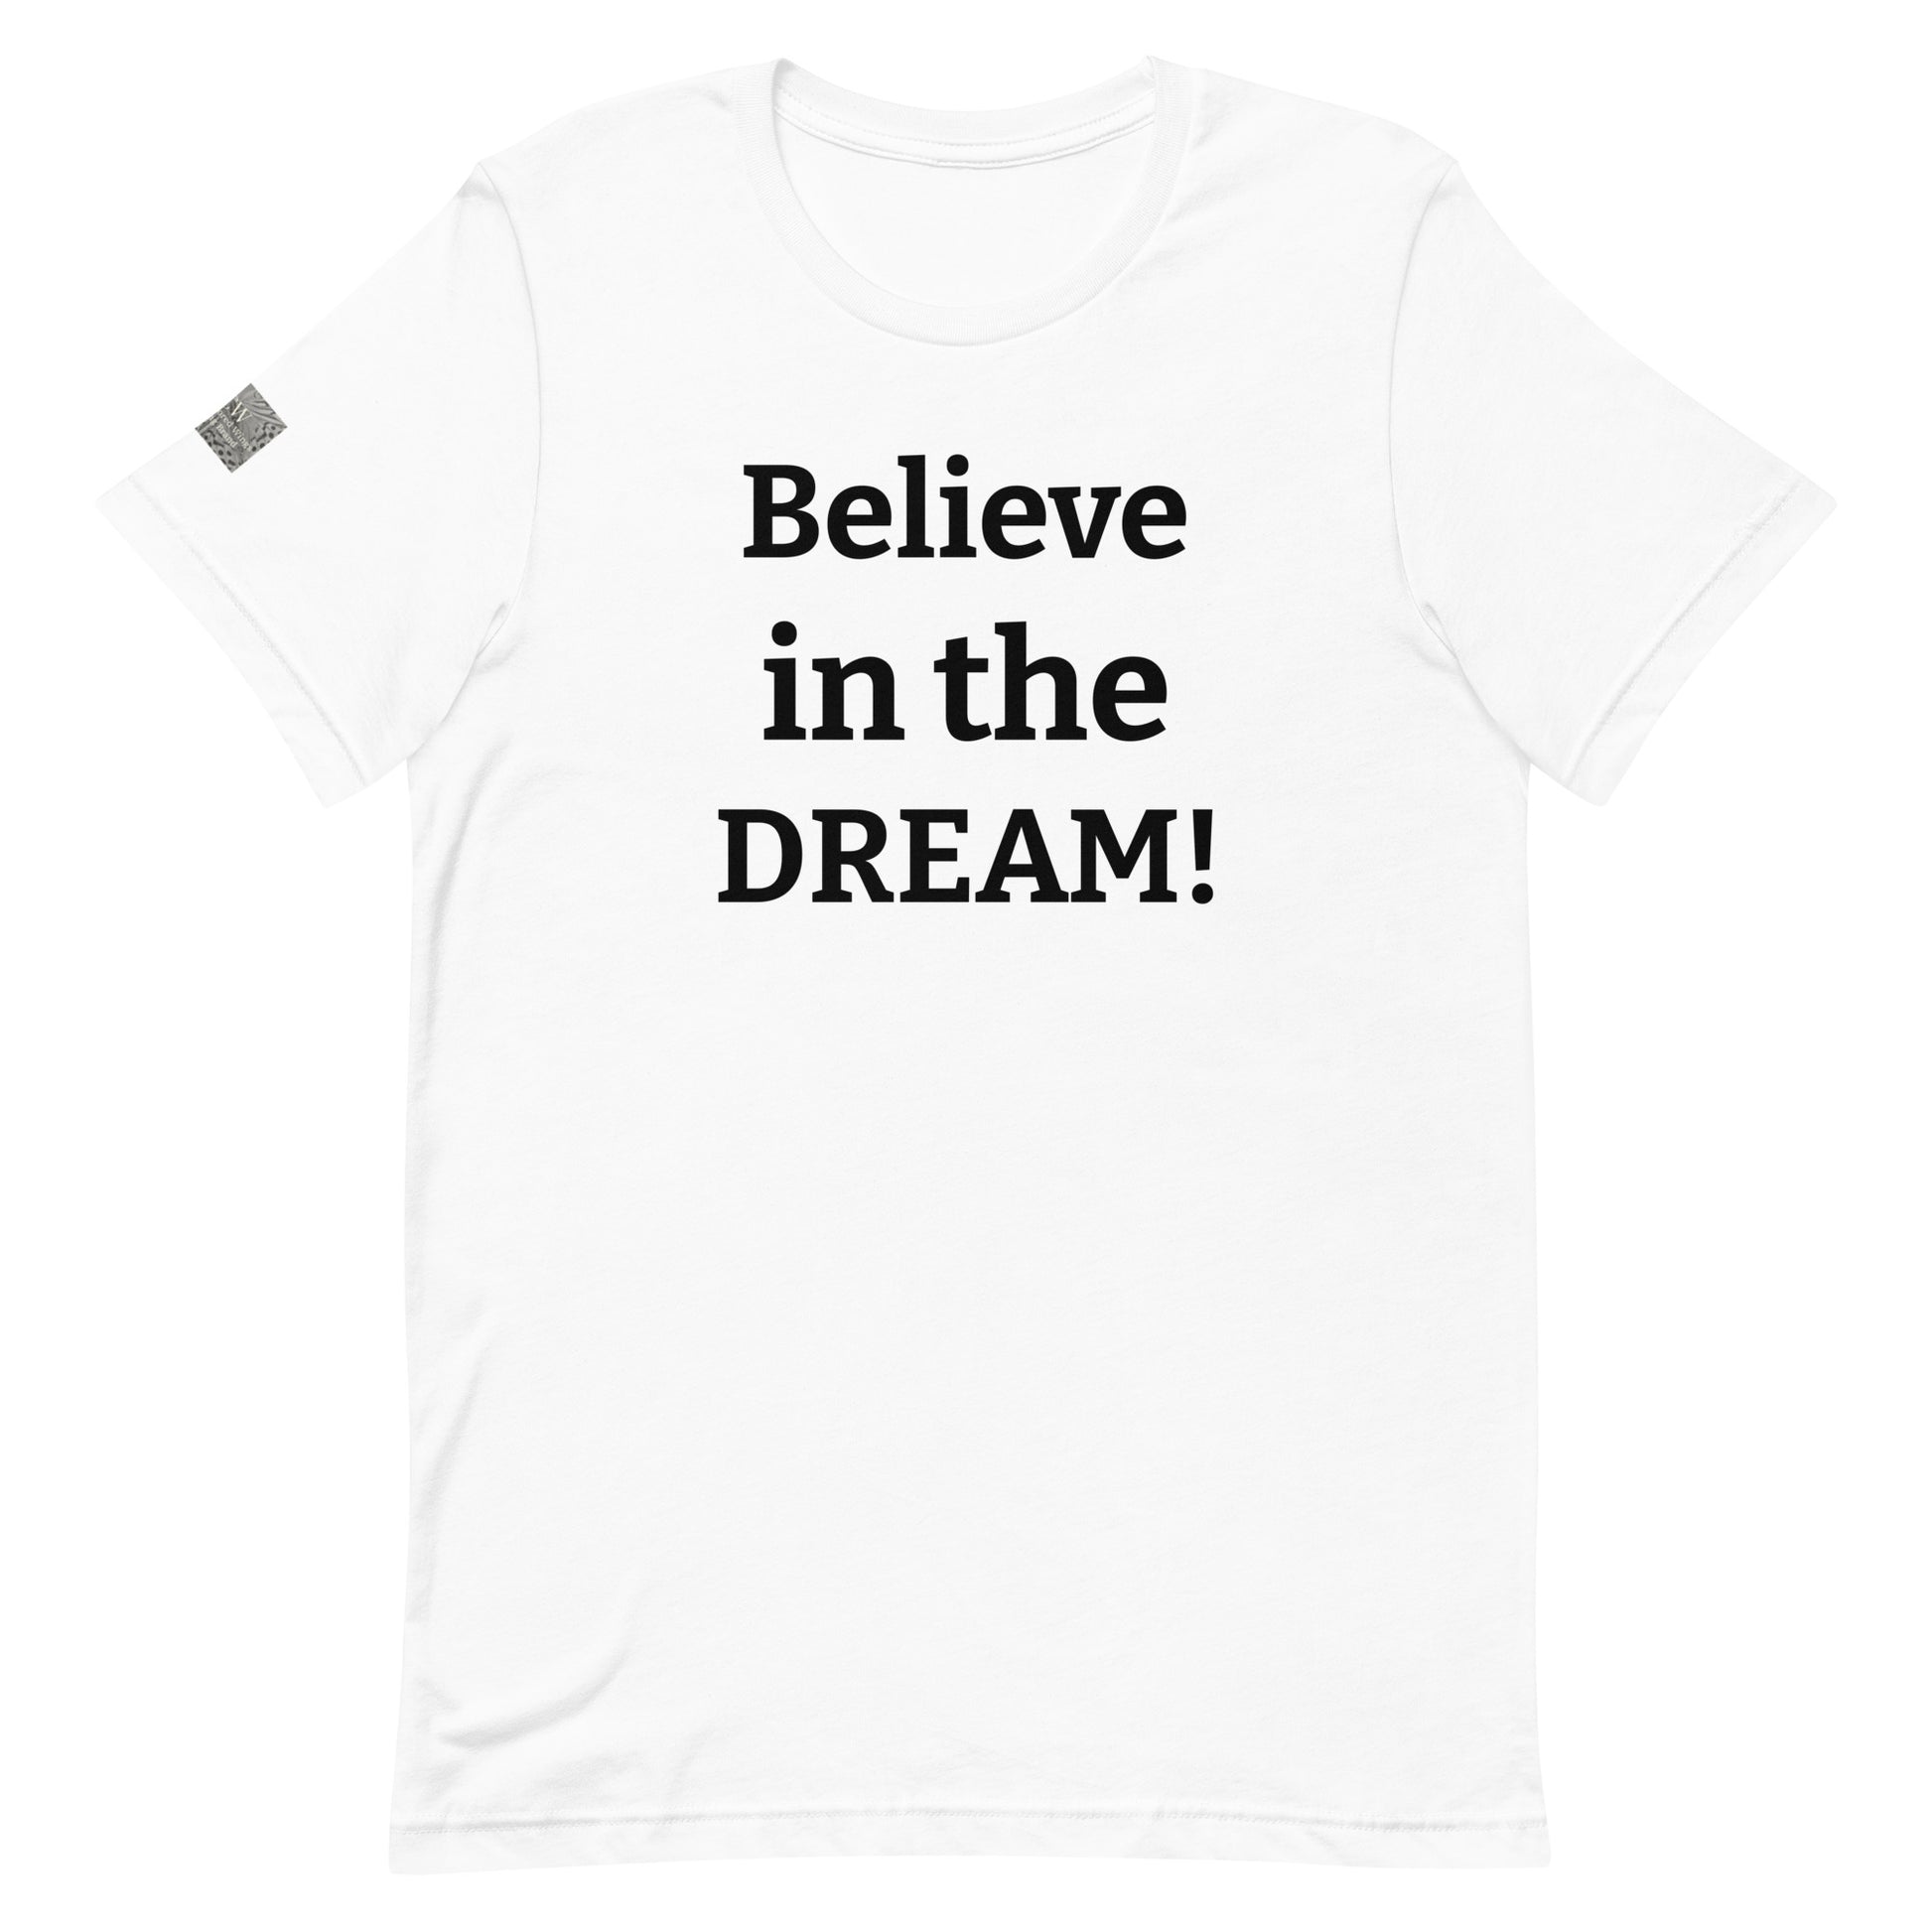 White Believe in the DREAM! Unisex Tshirt Bright Colored Wings